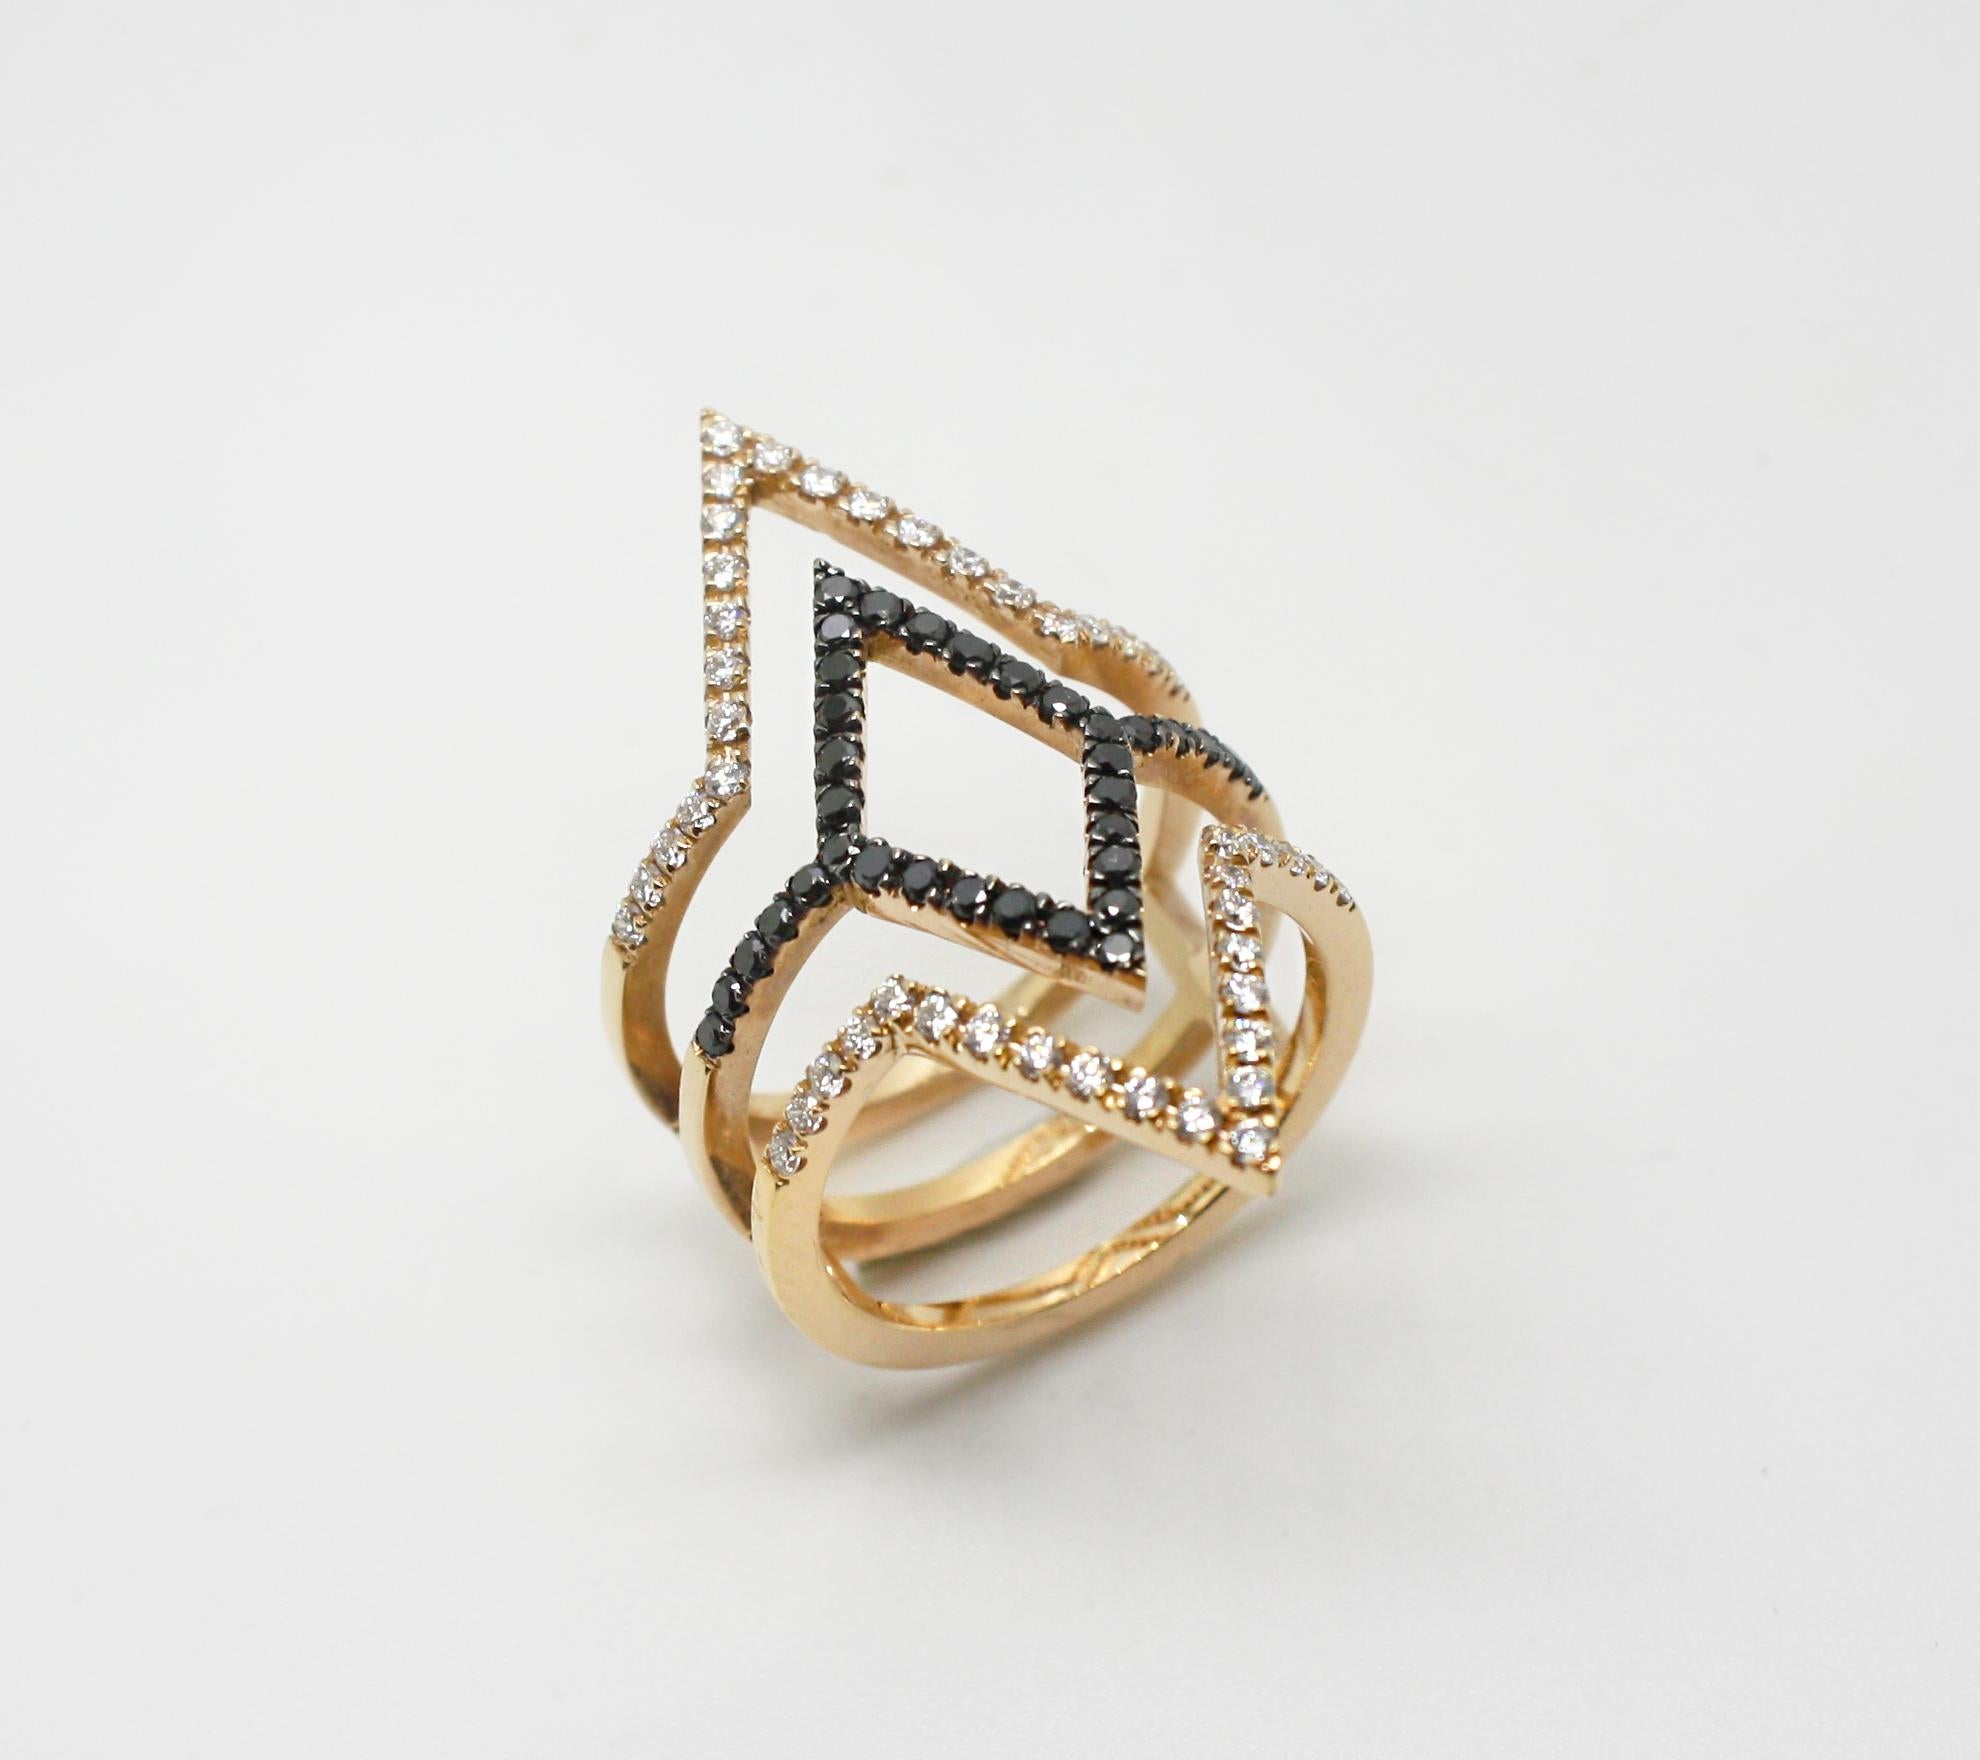 This S.Georgios designer 18 Karat Rose Gold Black and White Diamond Ring are all handmade in a unique Spiral design and have set the black diamonds in Black Rhodium prongs giving it a stunning look. The gorgeous ring features brilliant cut white